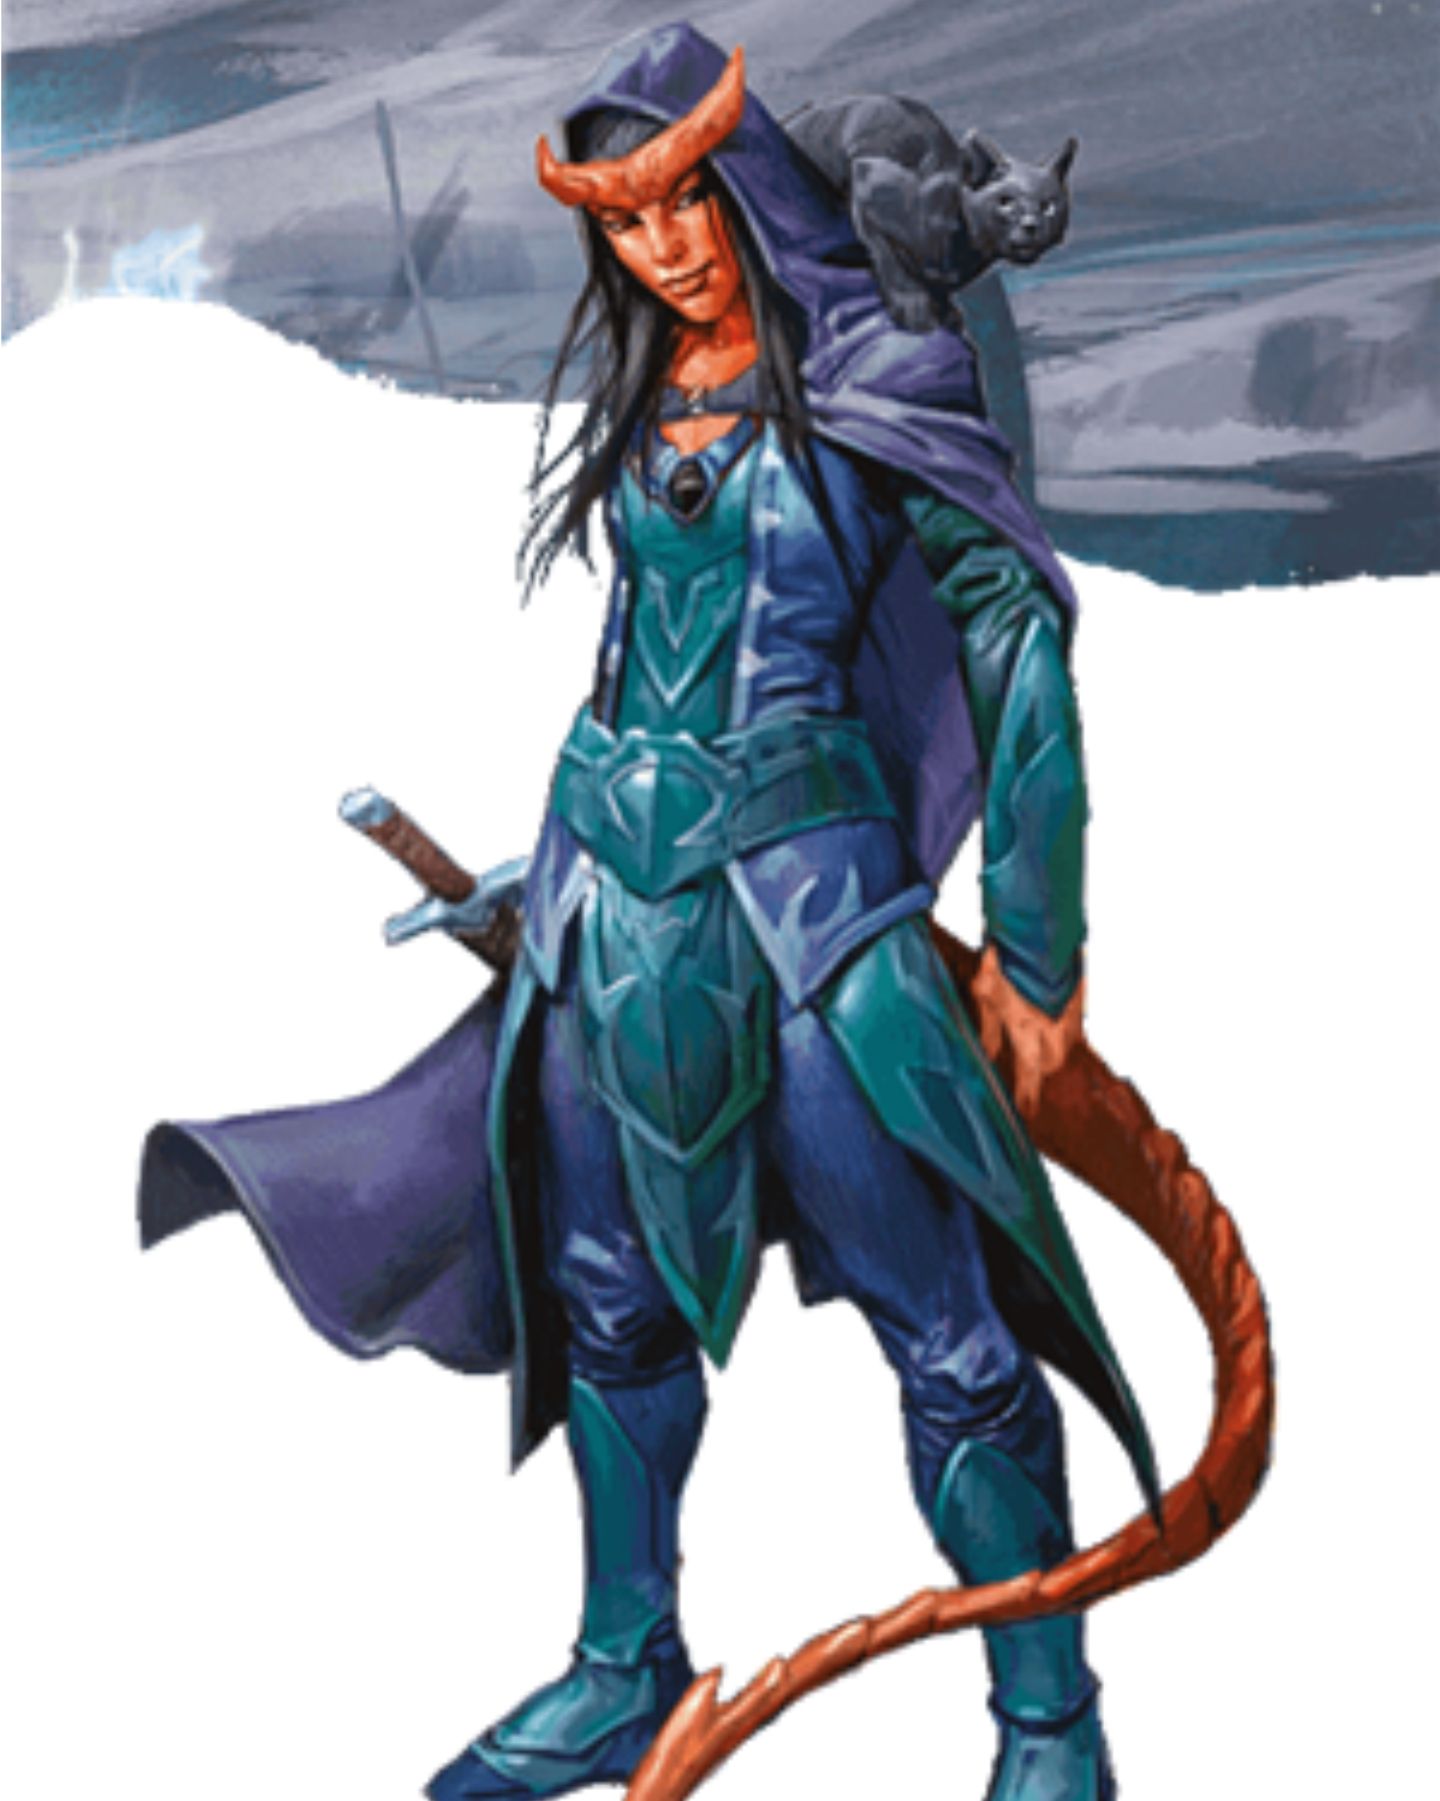 A shadow sorcerer Tiefling stands at the ready with her dagger sheathed and a black cat on her shoulder